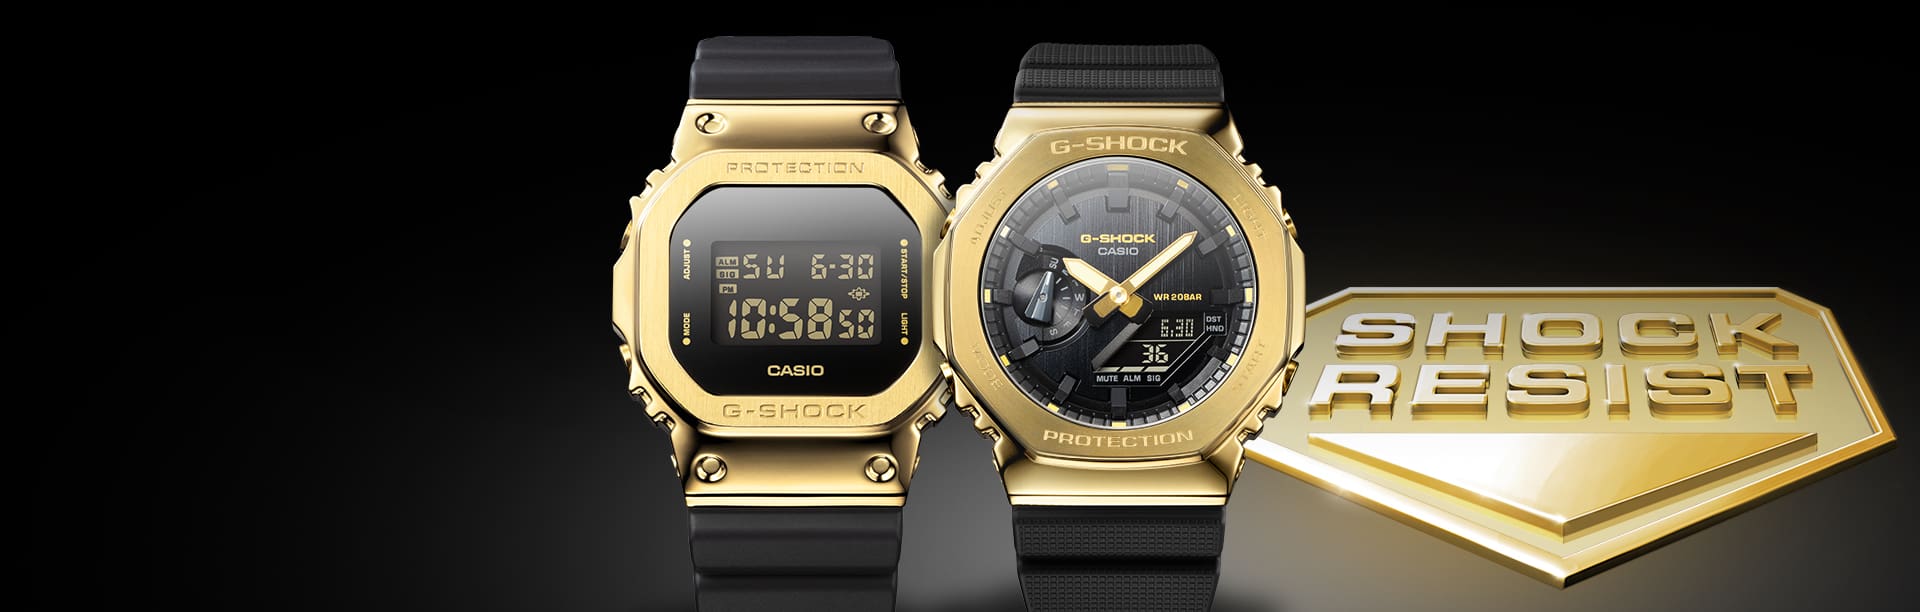 GM-2100G-1A9 Analog Digital and GM-5600G-9 Digital gold watches with black bands next to shock resist badge